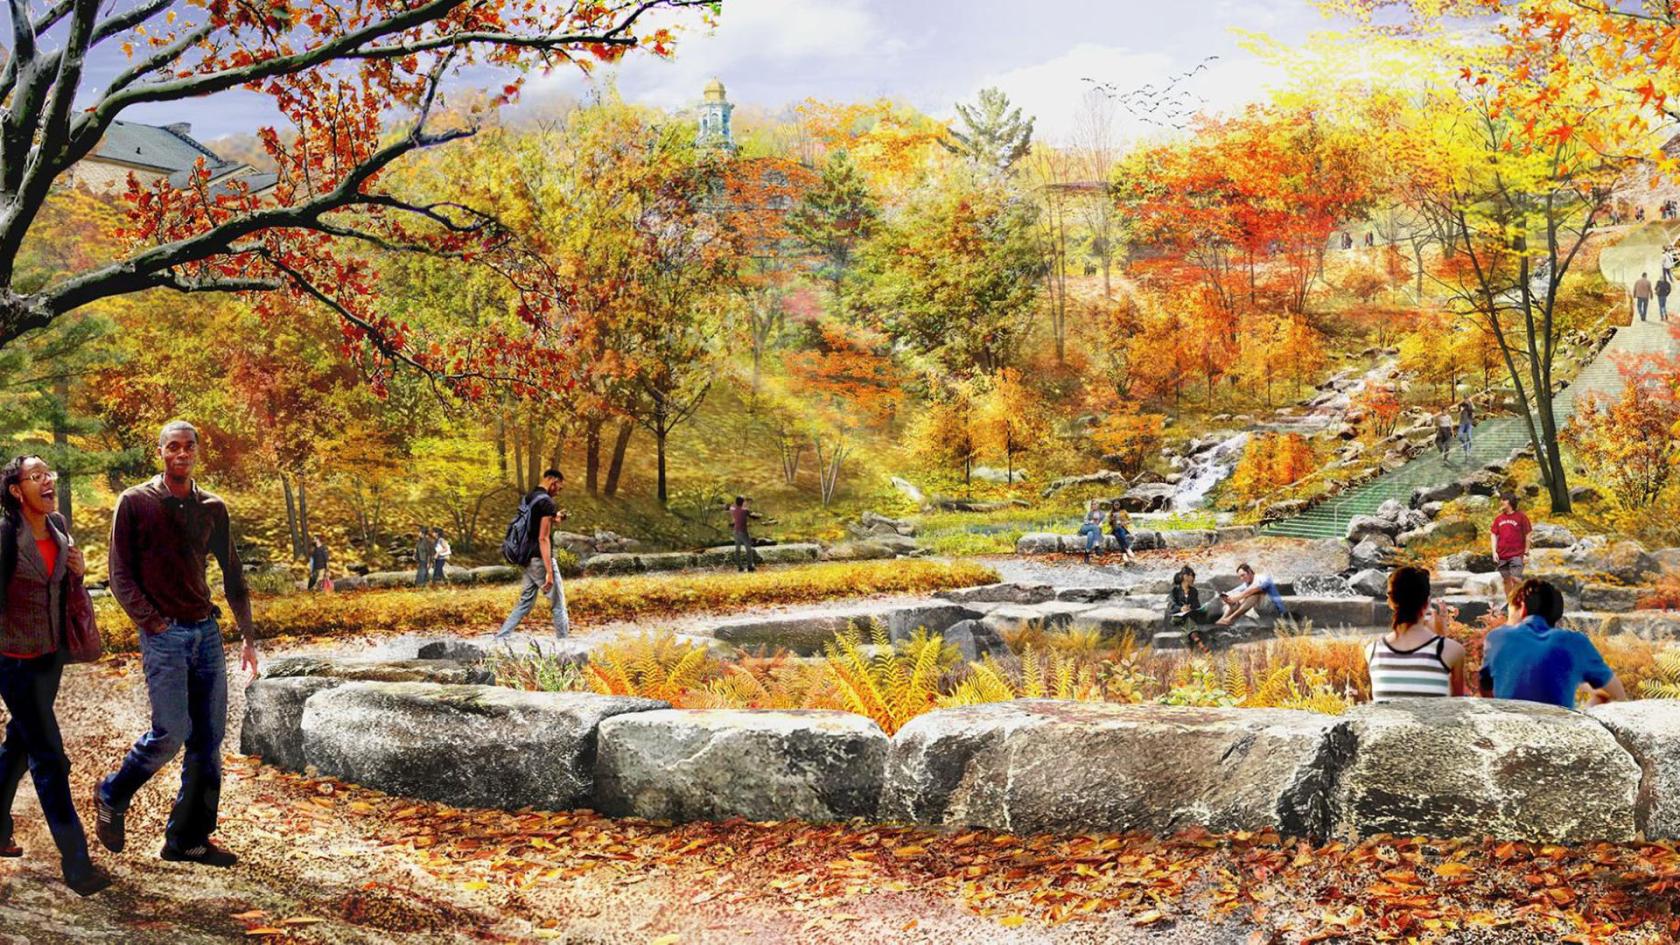 rtist rendering of the power portion of Peter's Glen with students walking past a water pool.